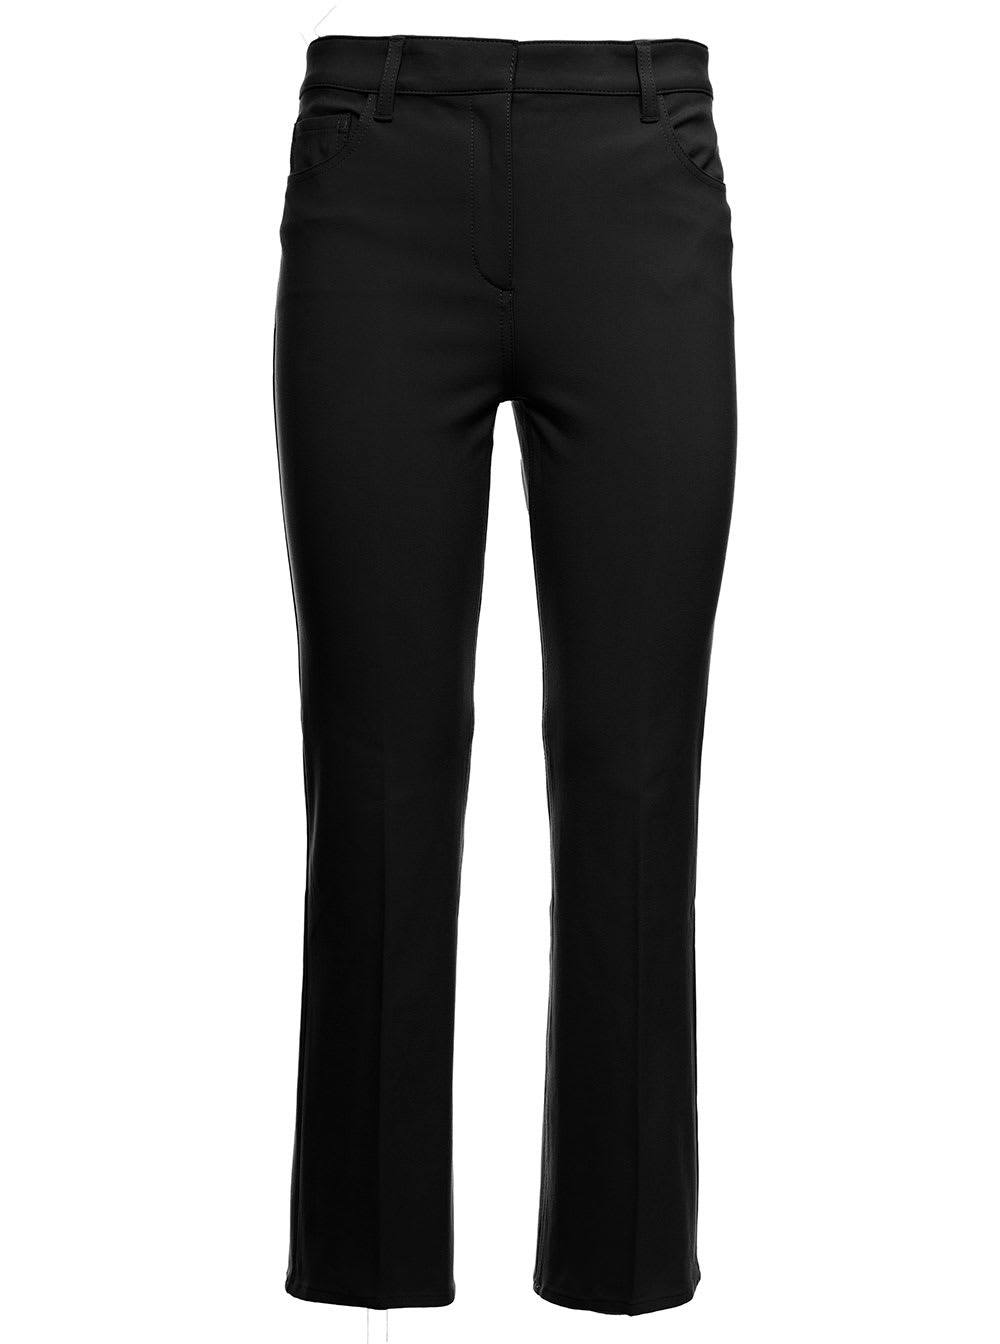 Theory Womans Black Cotton Blend Trousers